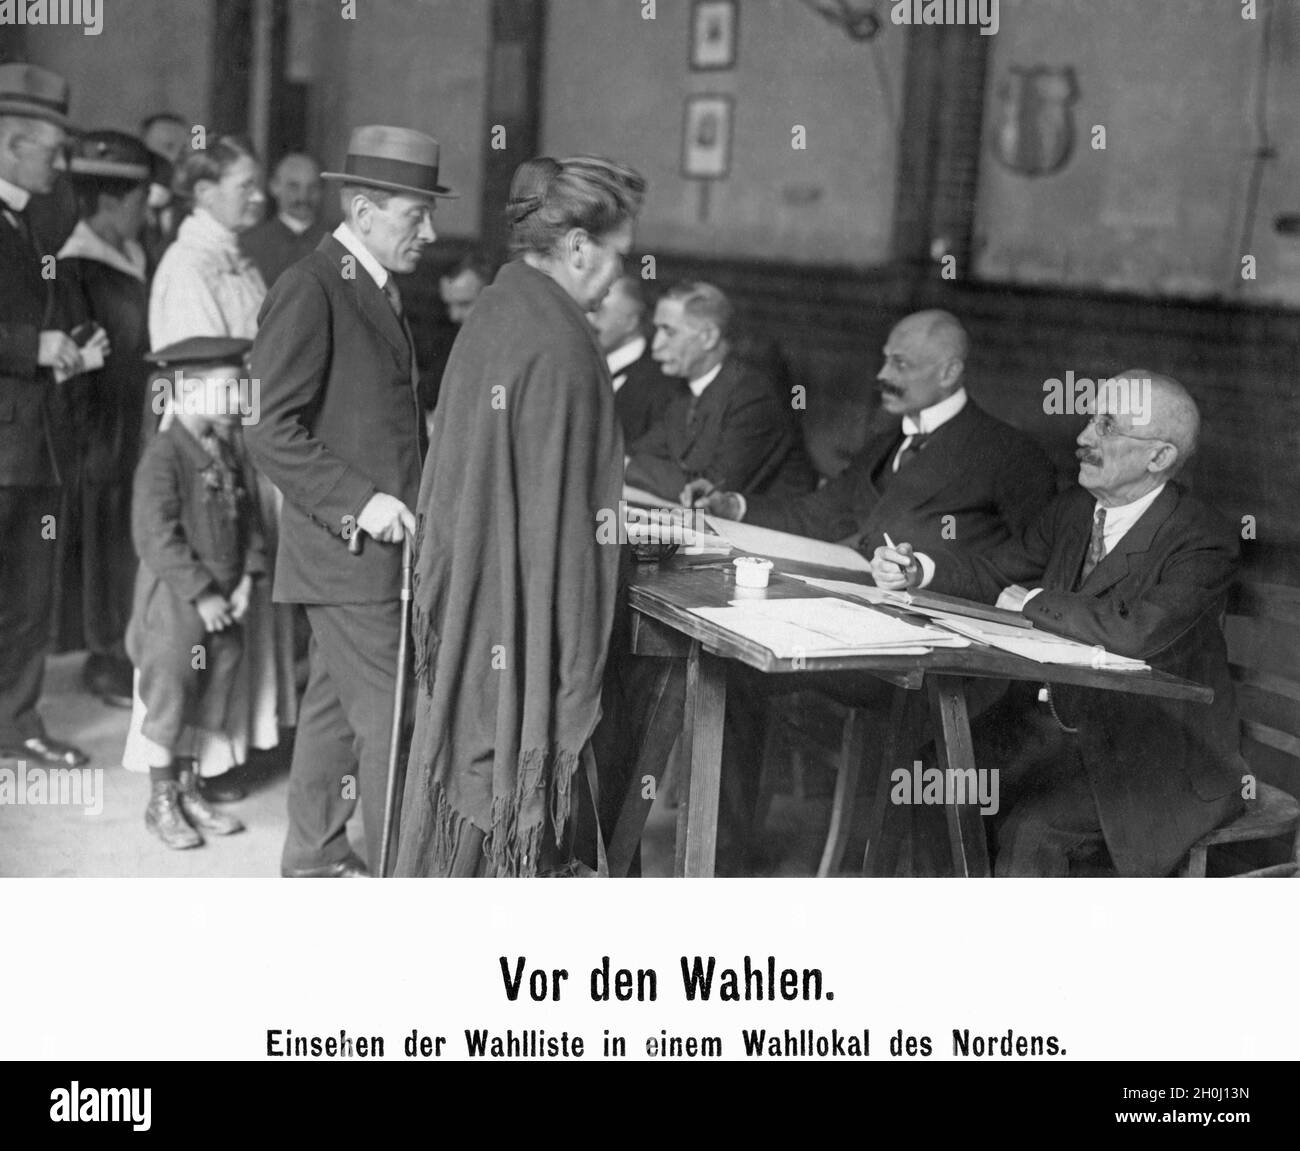 Voters look at the electoral list at a polling station in northern Germany before the election to the Weimar National Assembly on January 19, 1919: for the first time, women were allowed to vote as equal citizens. [automated translation] Stock Photo